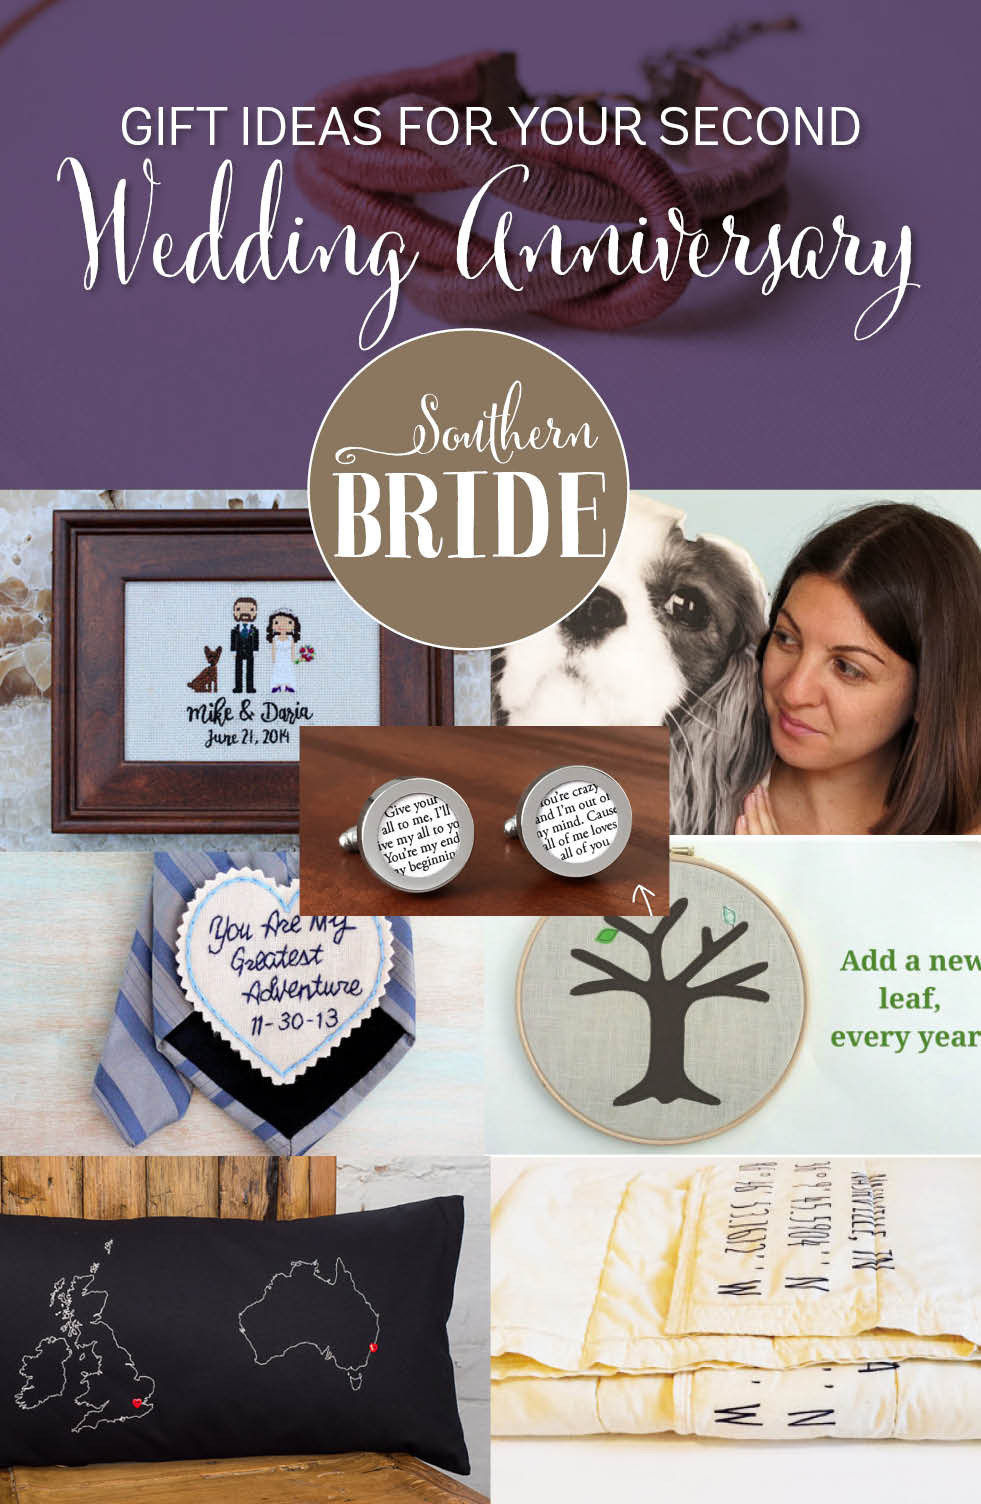 Wedding Gift Ideas For Second Marriages
 Second wedding anniversary present ideas Southern Bride